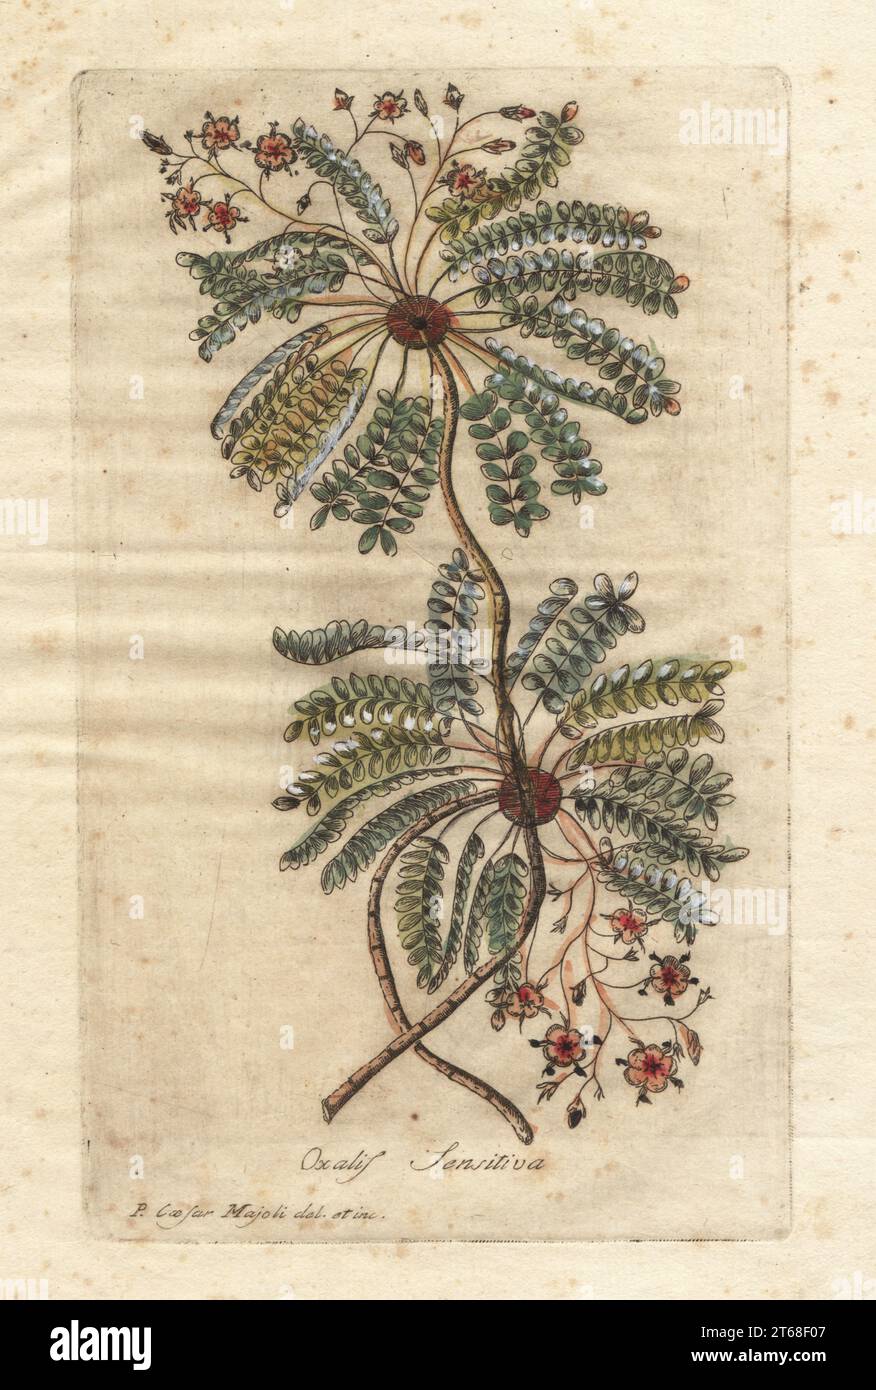 Little tree plant or Mukkootti, Biophytum sensitivum. As sensible wood-sorrel, Oxalis sensitiva, Nepal and India. Handcoloured copperplate engraving by Giuseppe Bianchi after Cesare Majoli from Giovanni Hill's Decade di alberi curiosi ed eleganti piante, Decade of Curious and Elegant Trees and Plants, Nella Stamperia Salomoni, Rome, 1786. It had first been published by John Hill in London in 1773. Stock Photo